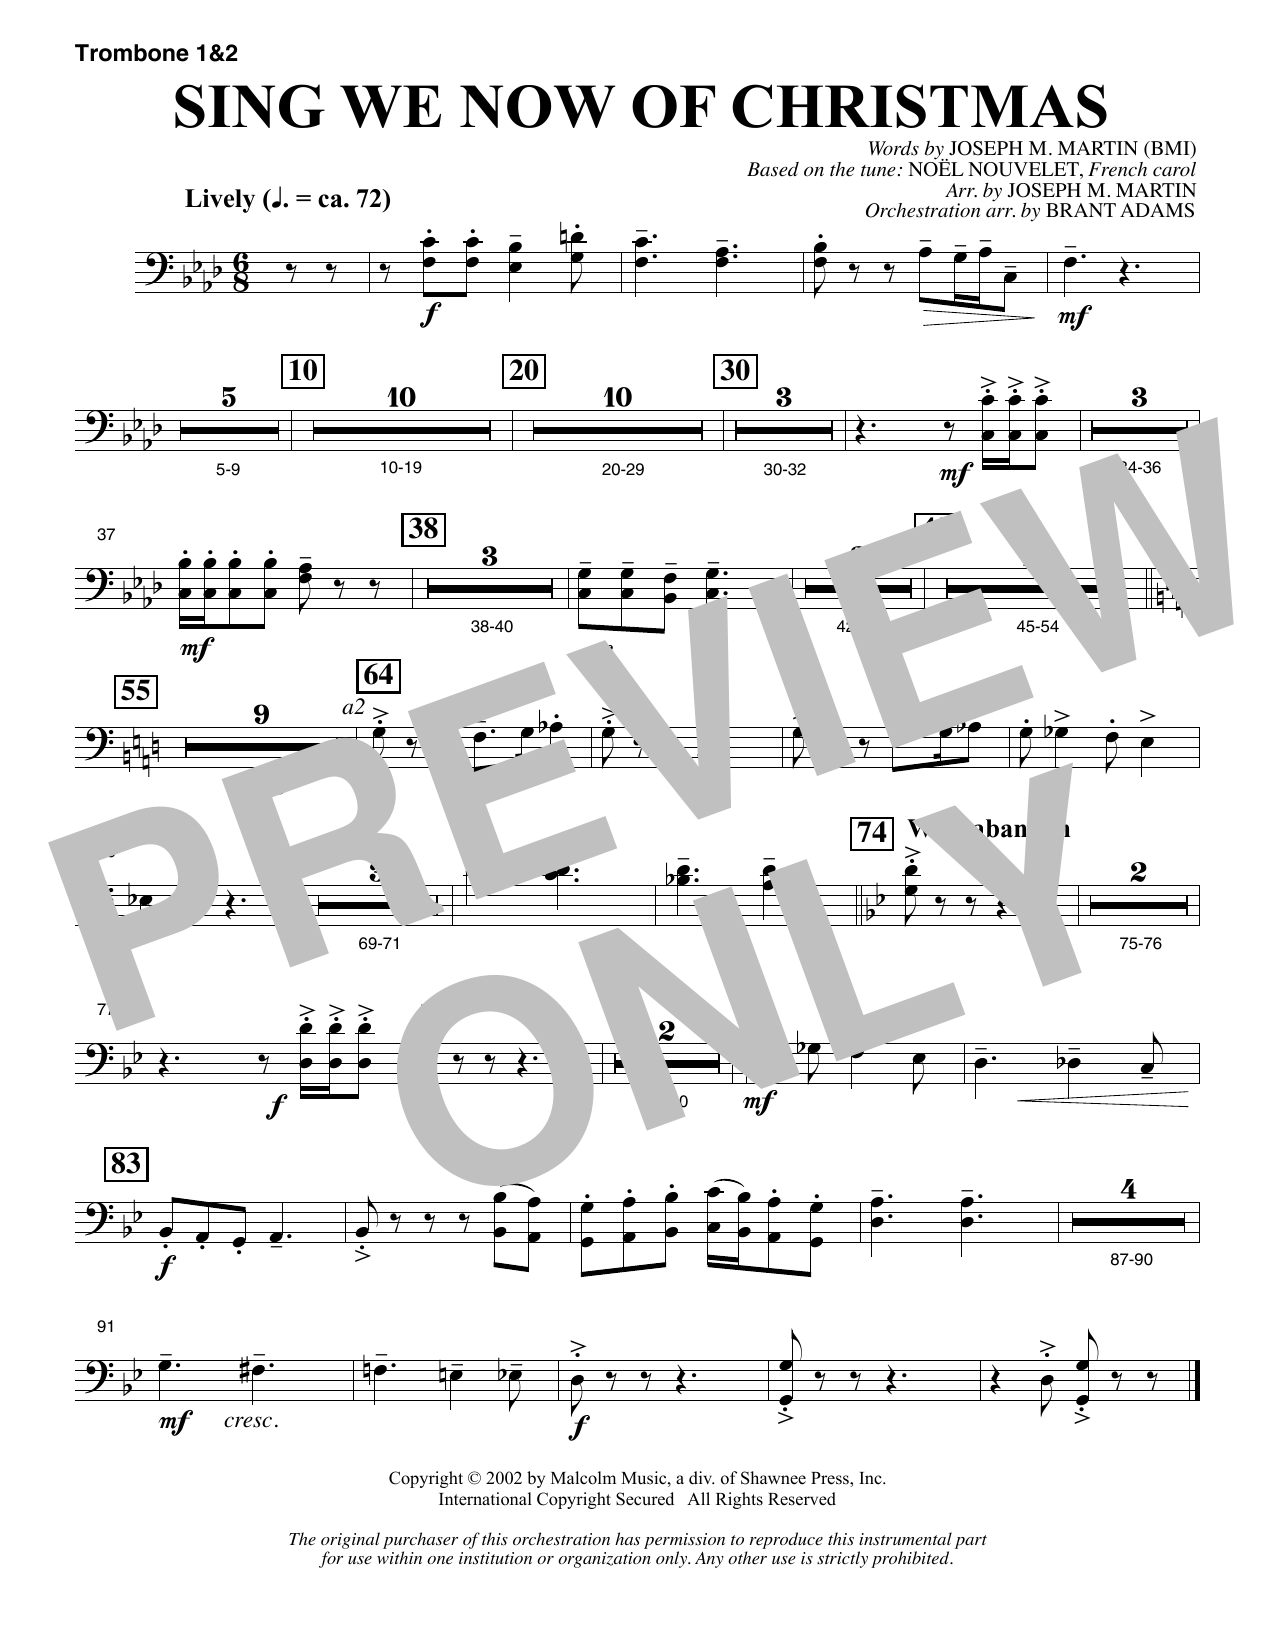 Download Joseph M. Martin Sing We Now Of Christmas (from Morning Sheet Music